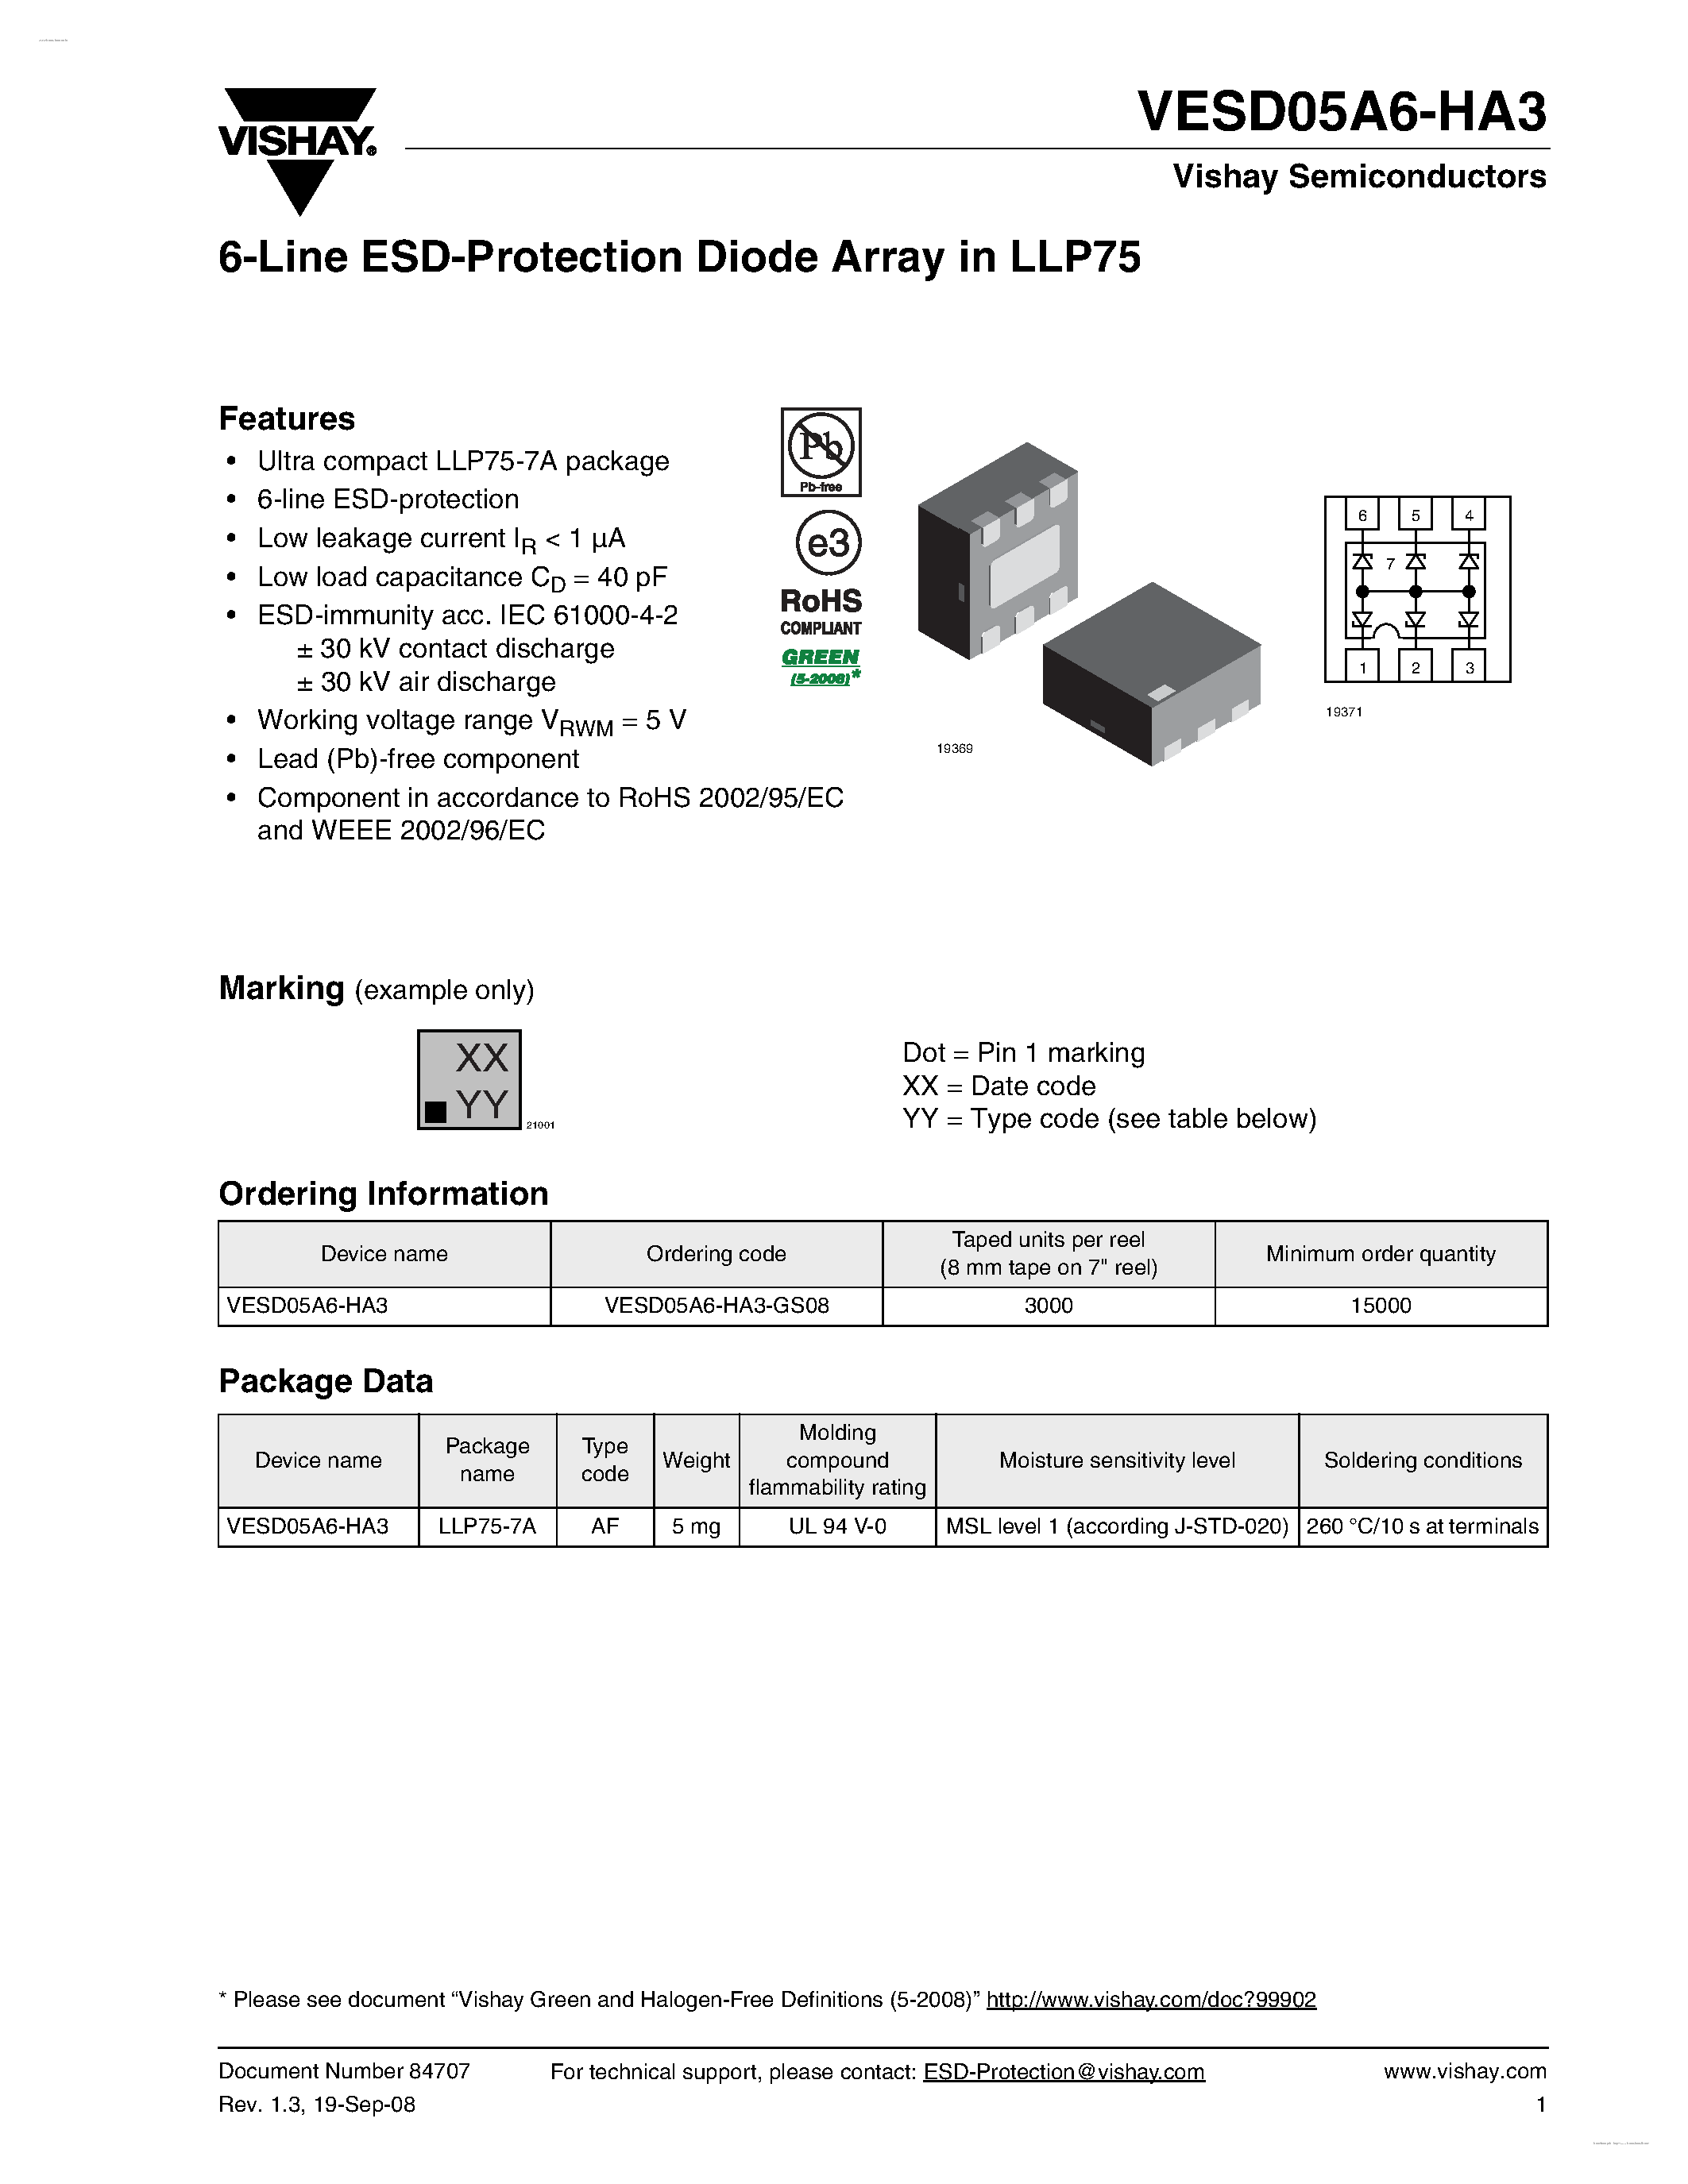 Datasheet VESD05A6-HA3 - 6-Line ESD-Protection Diode Array page 1